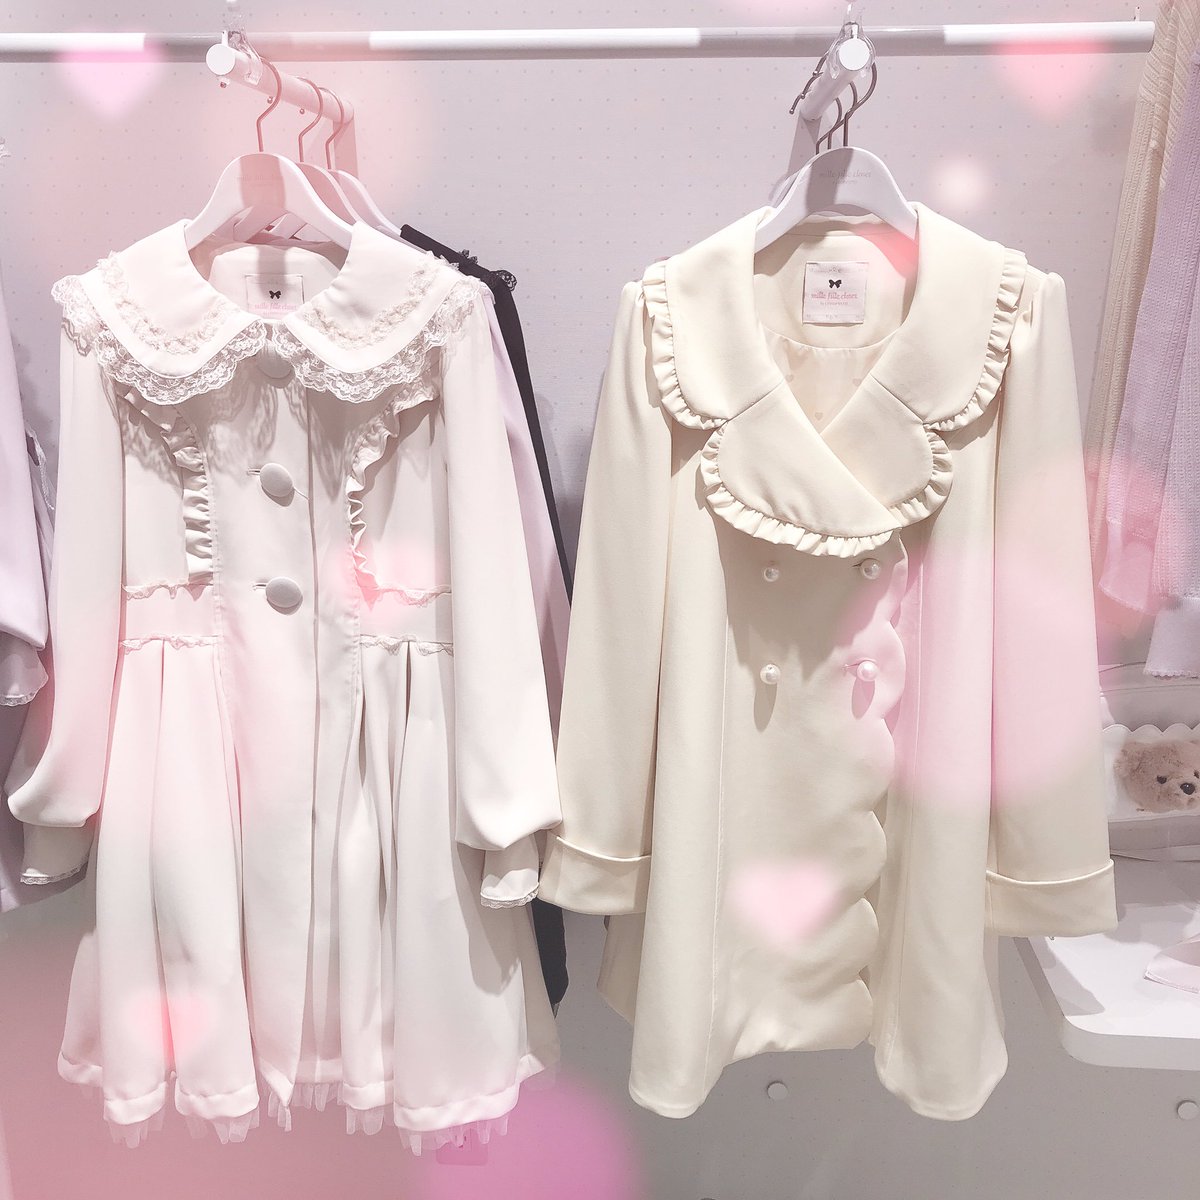 mille fille closet by LODISPOTTO ルミネエスト新宿 on X ...